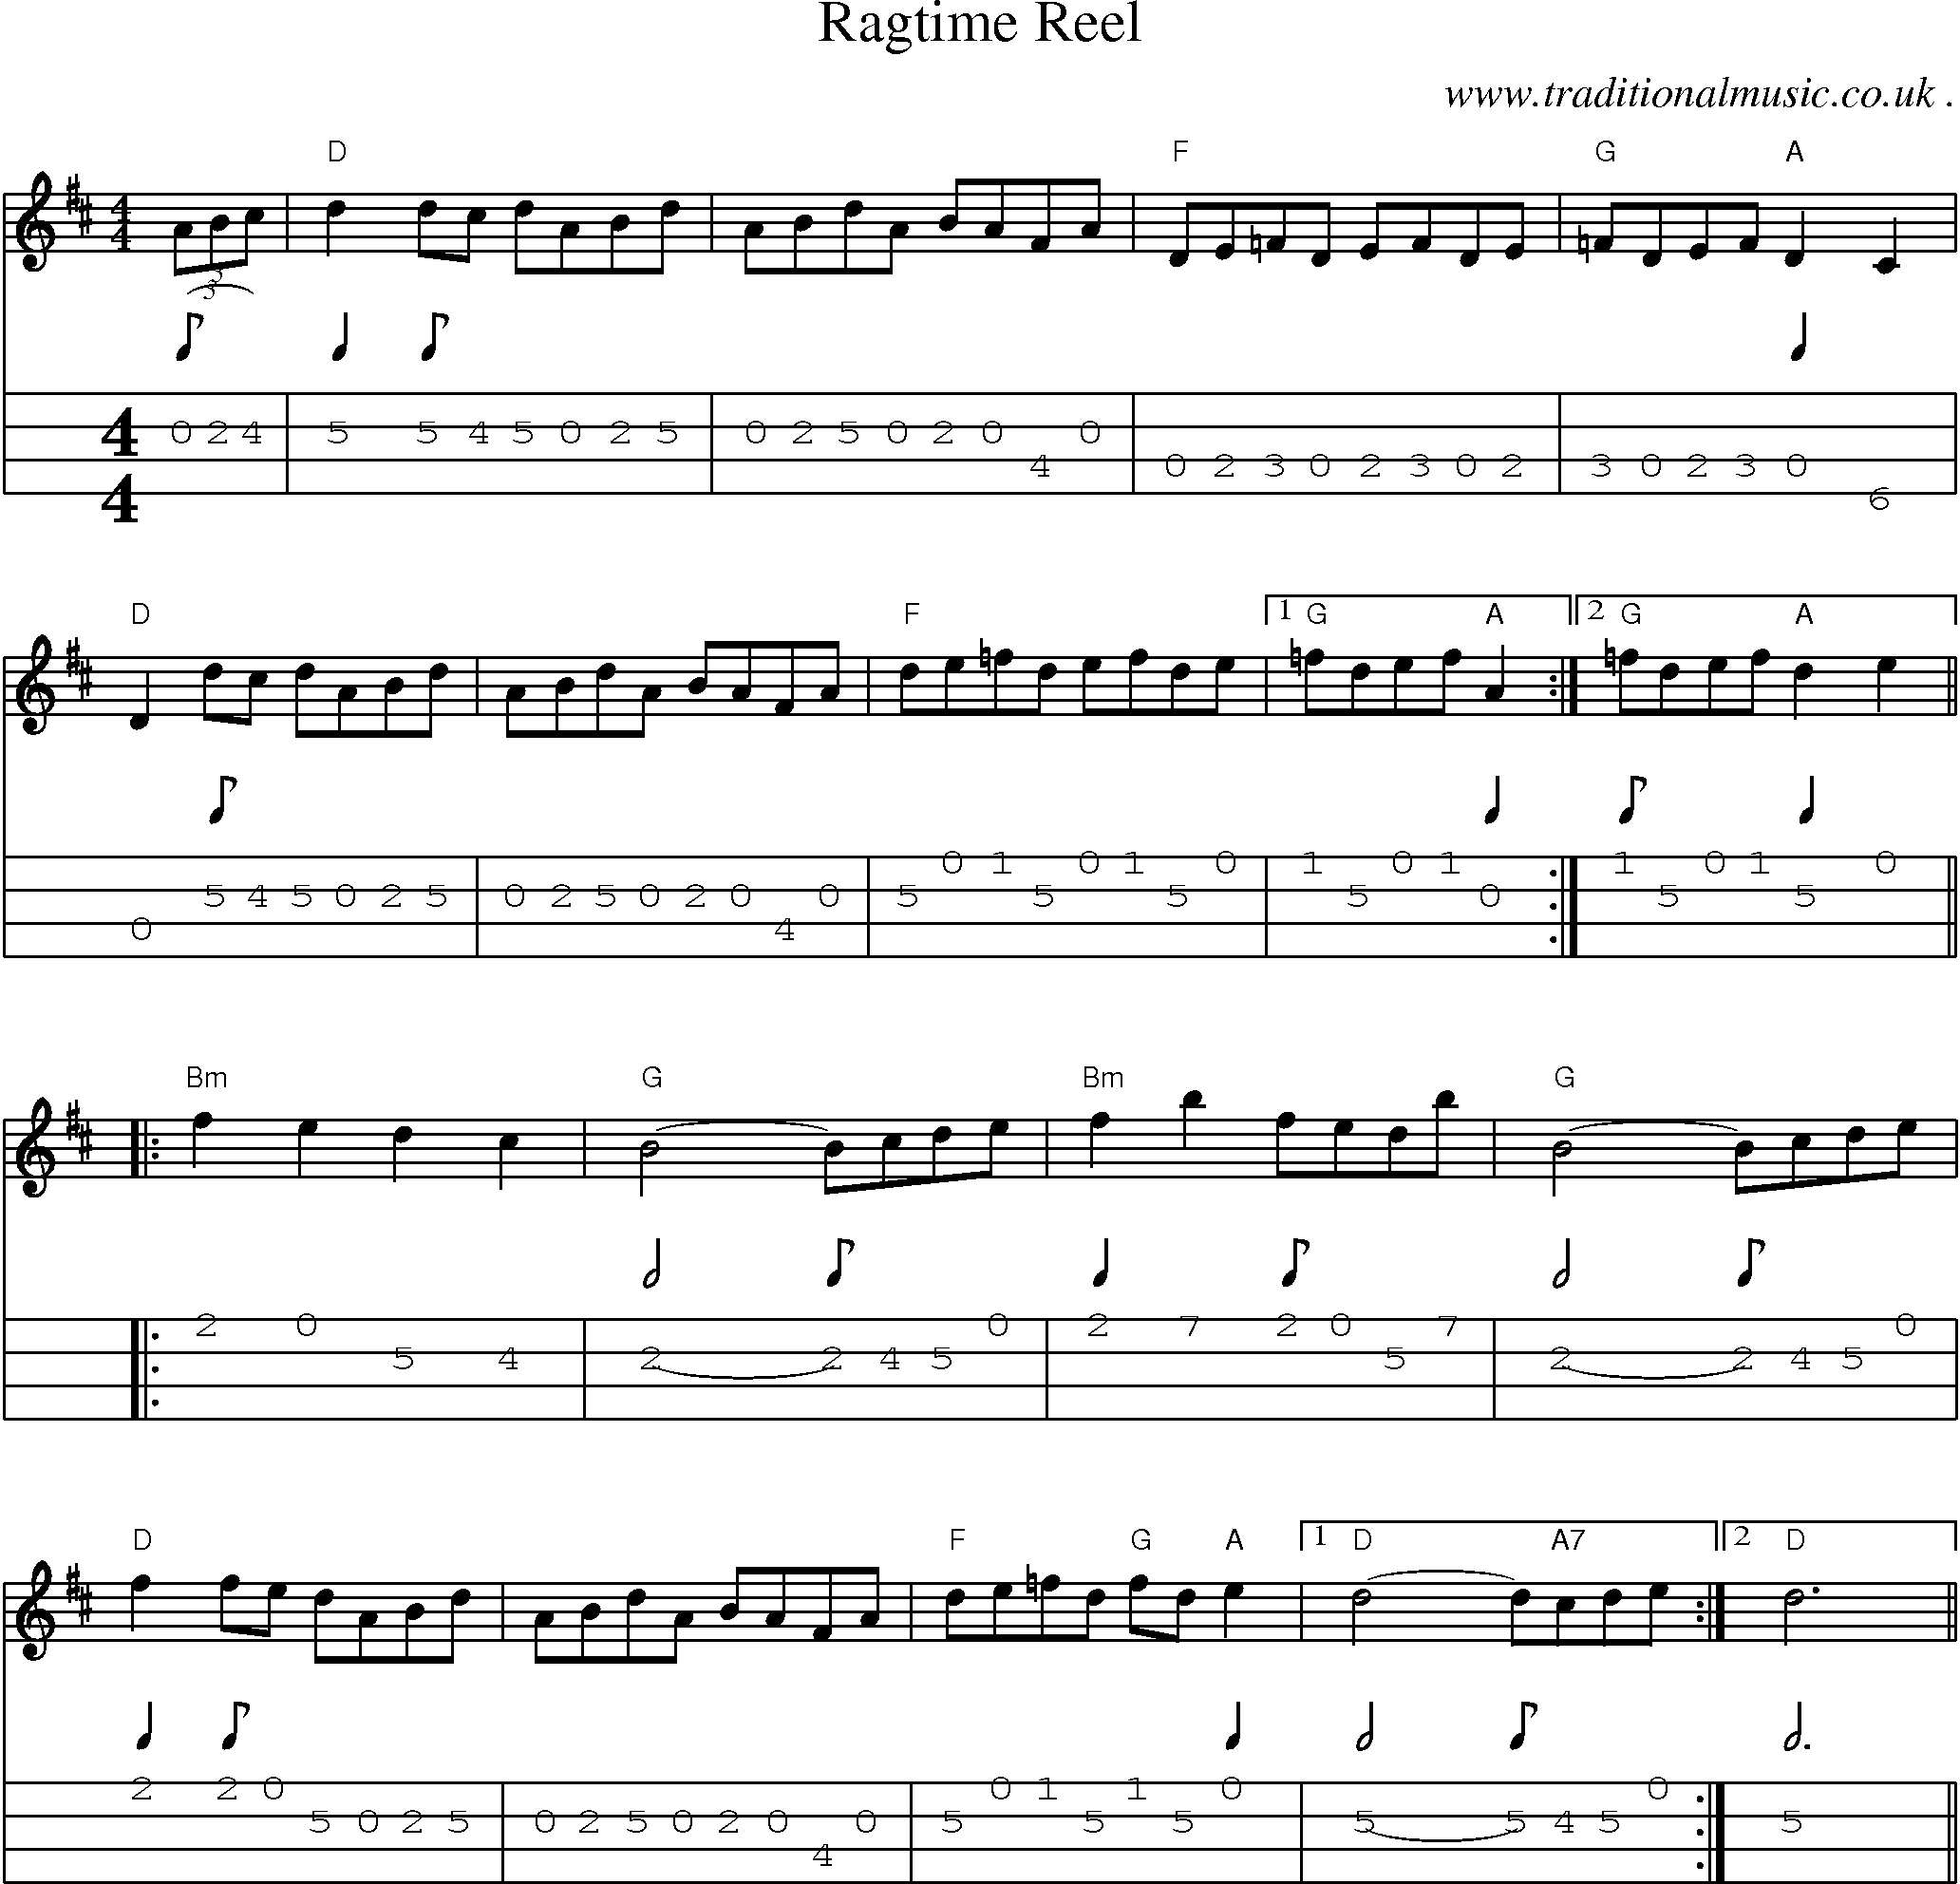 Music Score and Guitar Tabs for Ragtime Reel